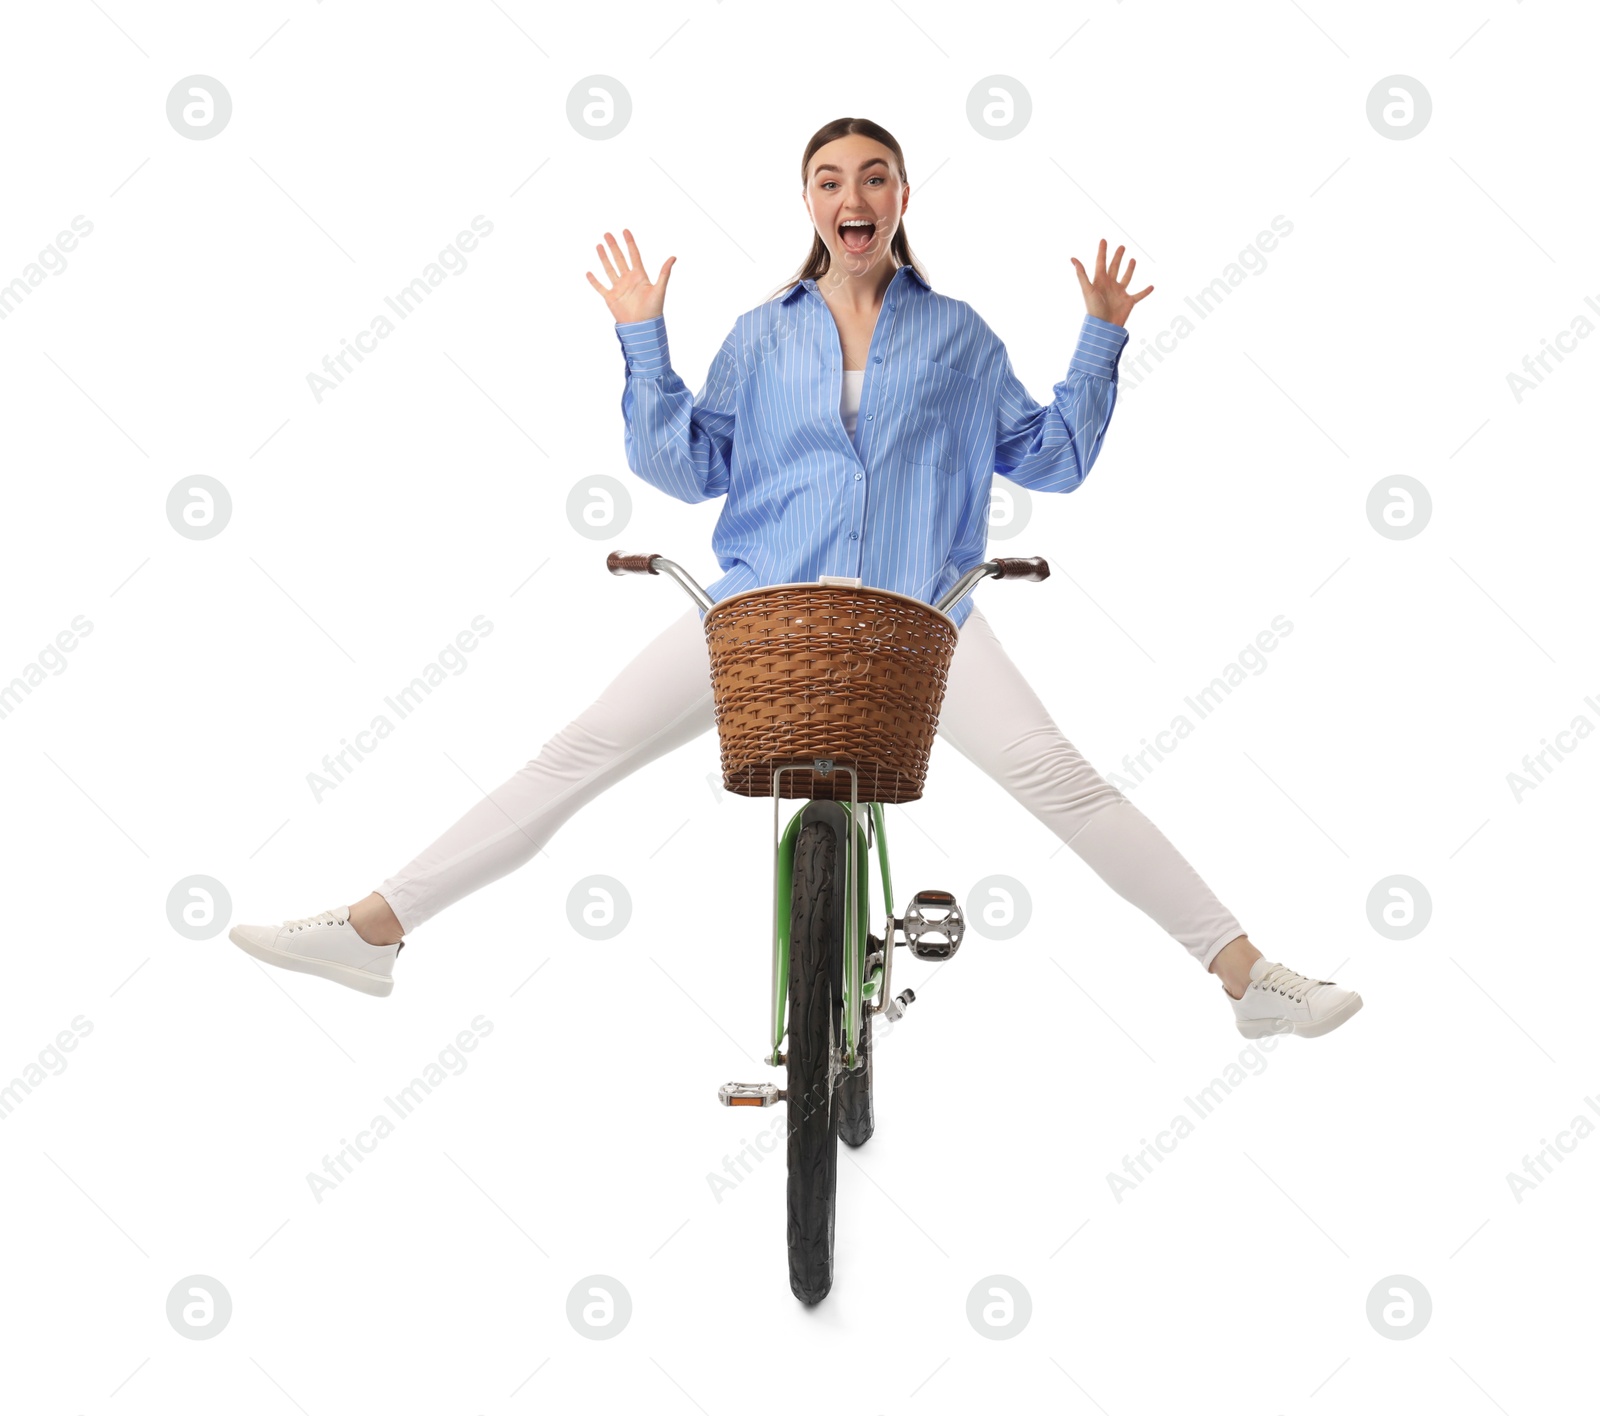 Photo of Emotional woman having fun while riding bicycle with basket against white background